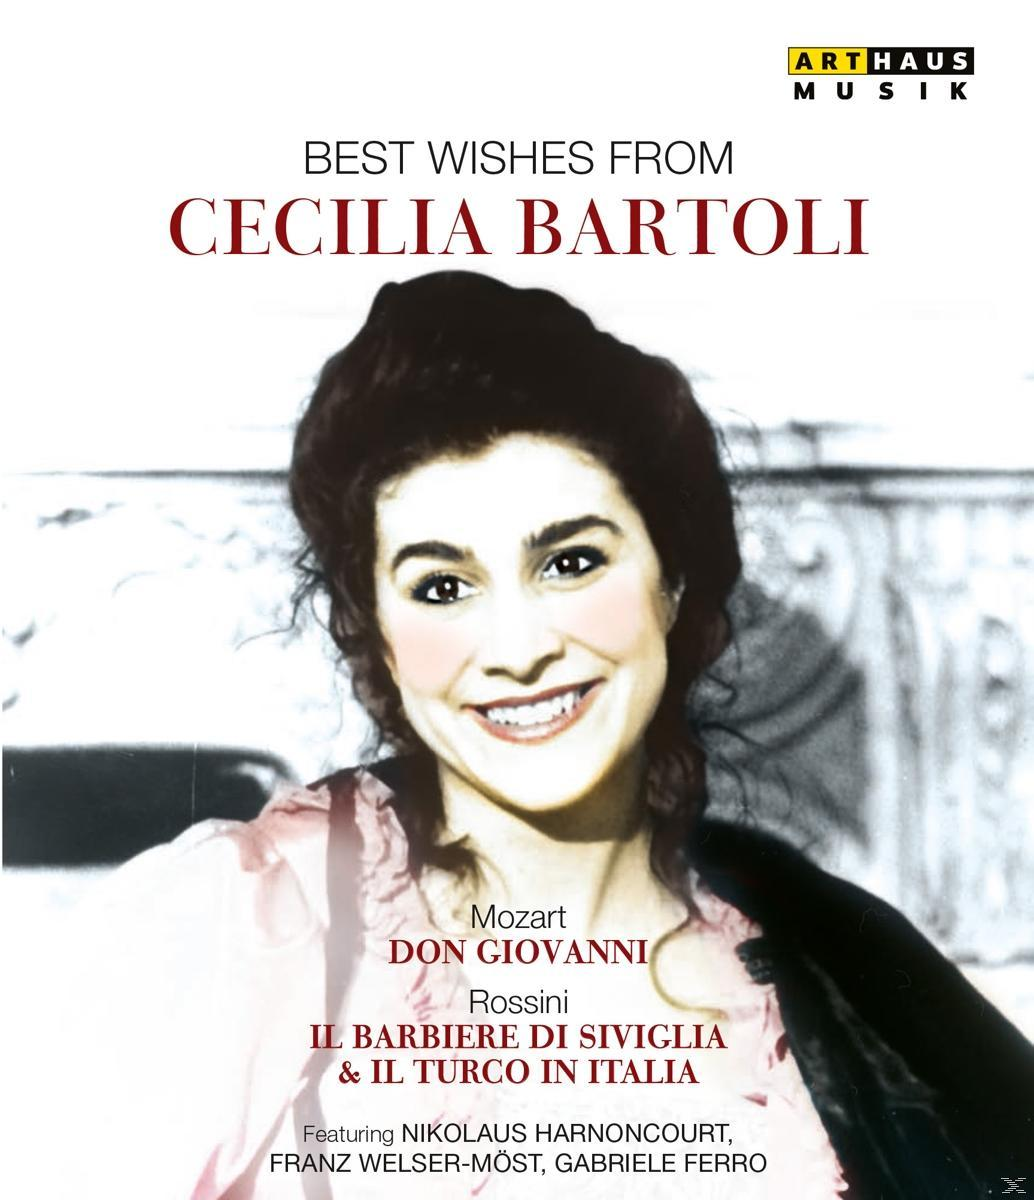 Bartoli City Of Symphony Orchestra Zurich Stuttgart - Cecilia Choir Opera, The And Cologne - The Chorus VARIOUS, (DVD) Best Wishes House, Radio Cecilia From Opera Choir Of Bartoli,